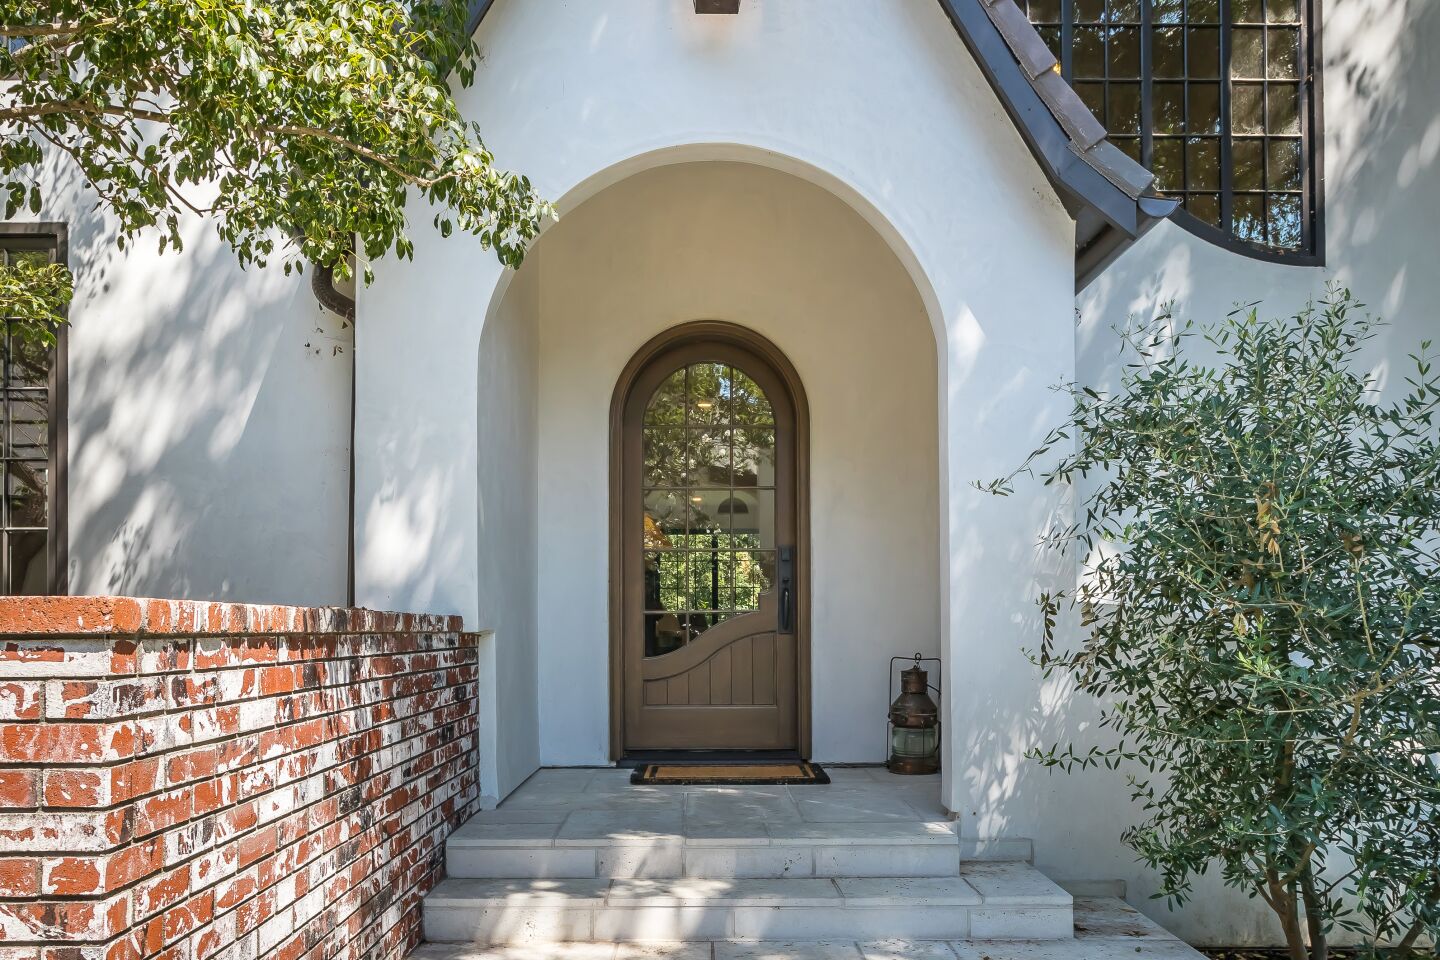 An arched front door and pitched roofline lend a whimsical quality to the house.